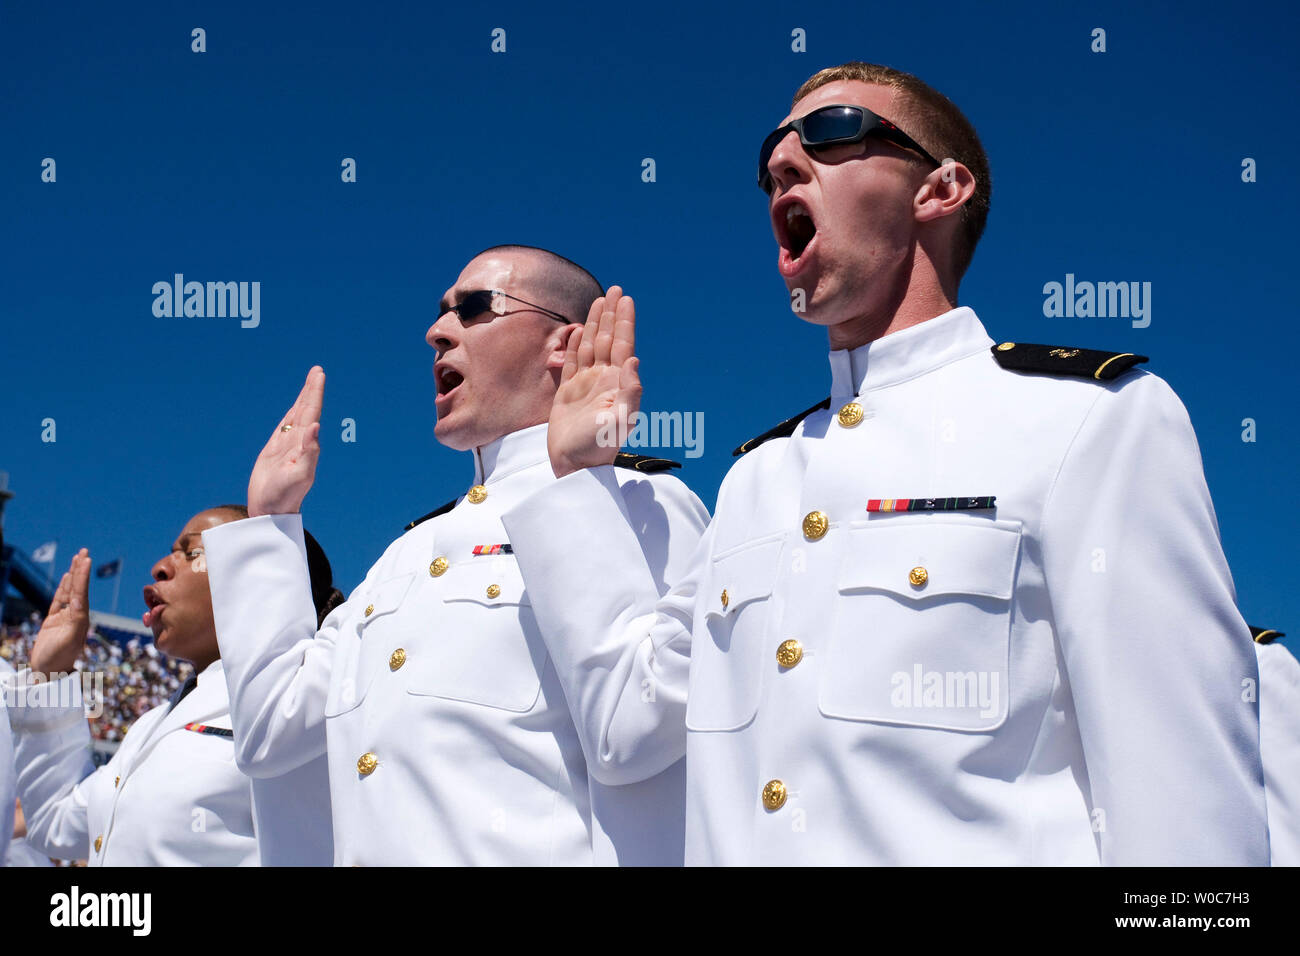 Midshipmen take their oath of office at the United States Naval Academy during Graduation and Commissioning Ceremonies for the Class of 2008 in Annapolis, Maryland on May 23, 2008. (UPI Photo/Patrick D. McDermott) Stock Photo